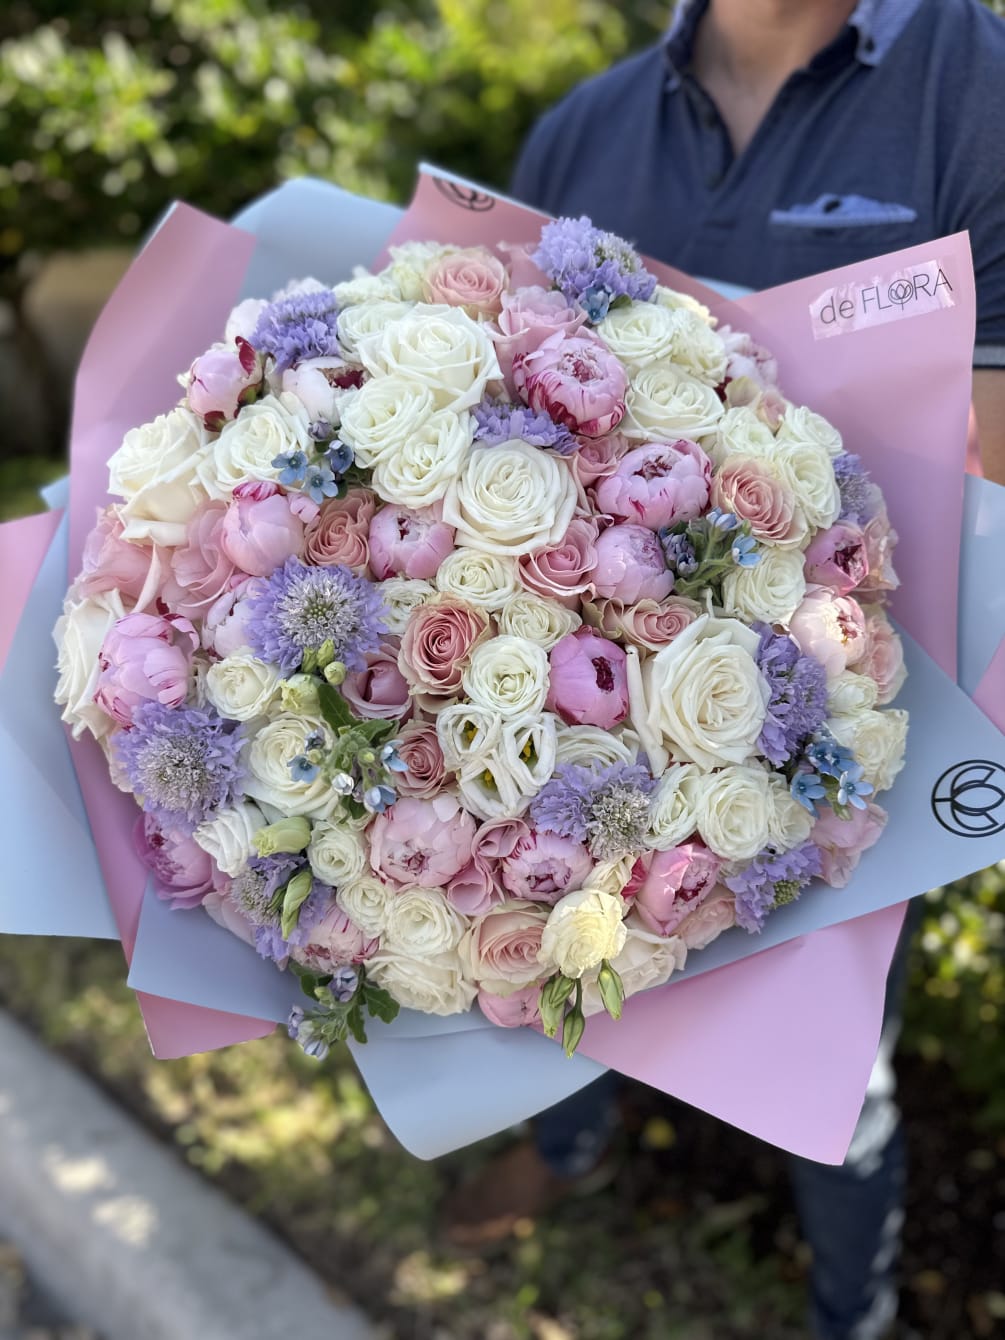 Large bouquet of peonies, roses, spray roses, lisianthus in pink and blue